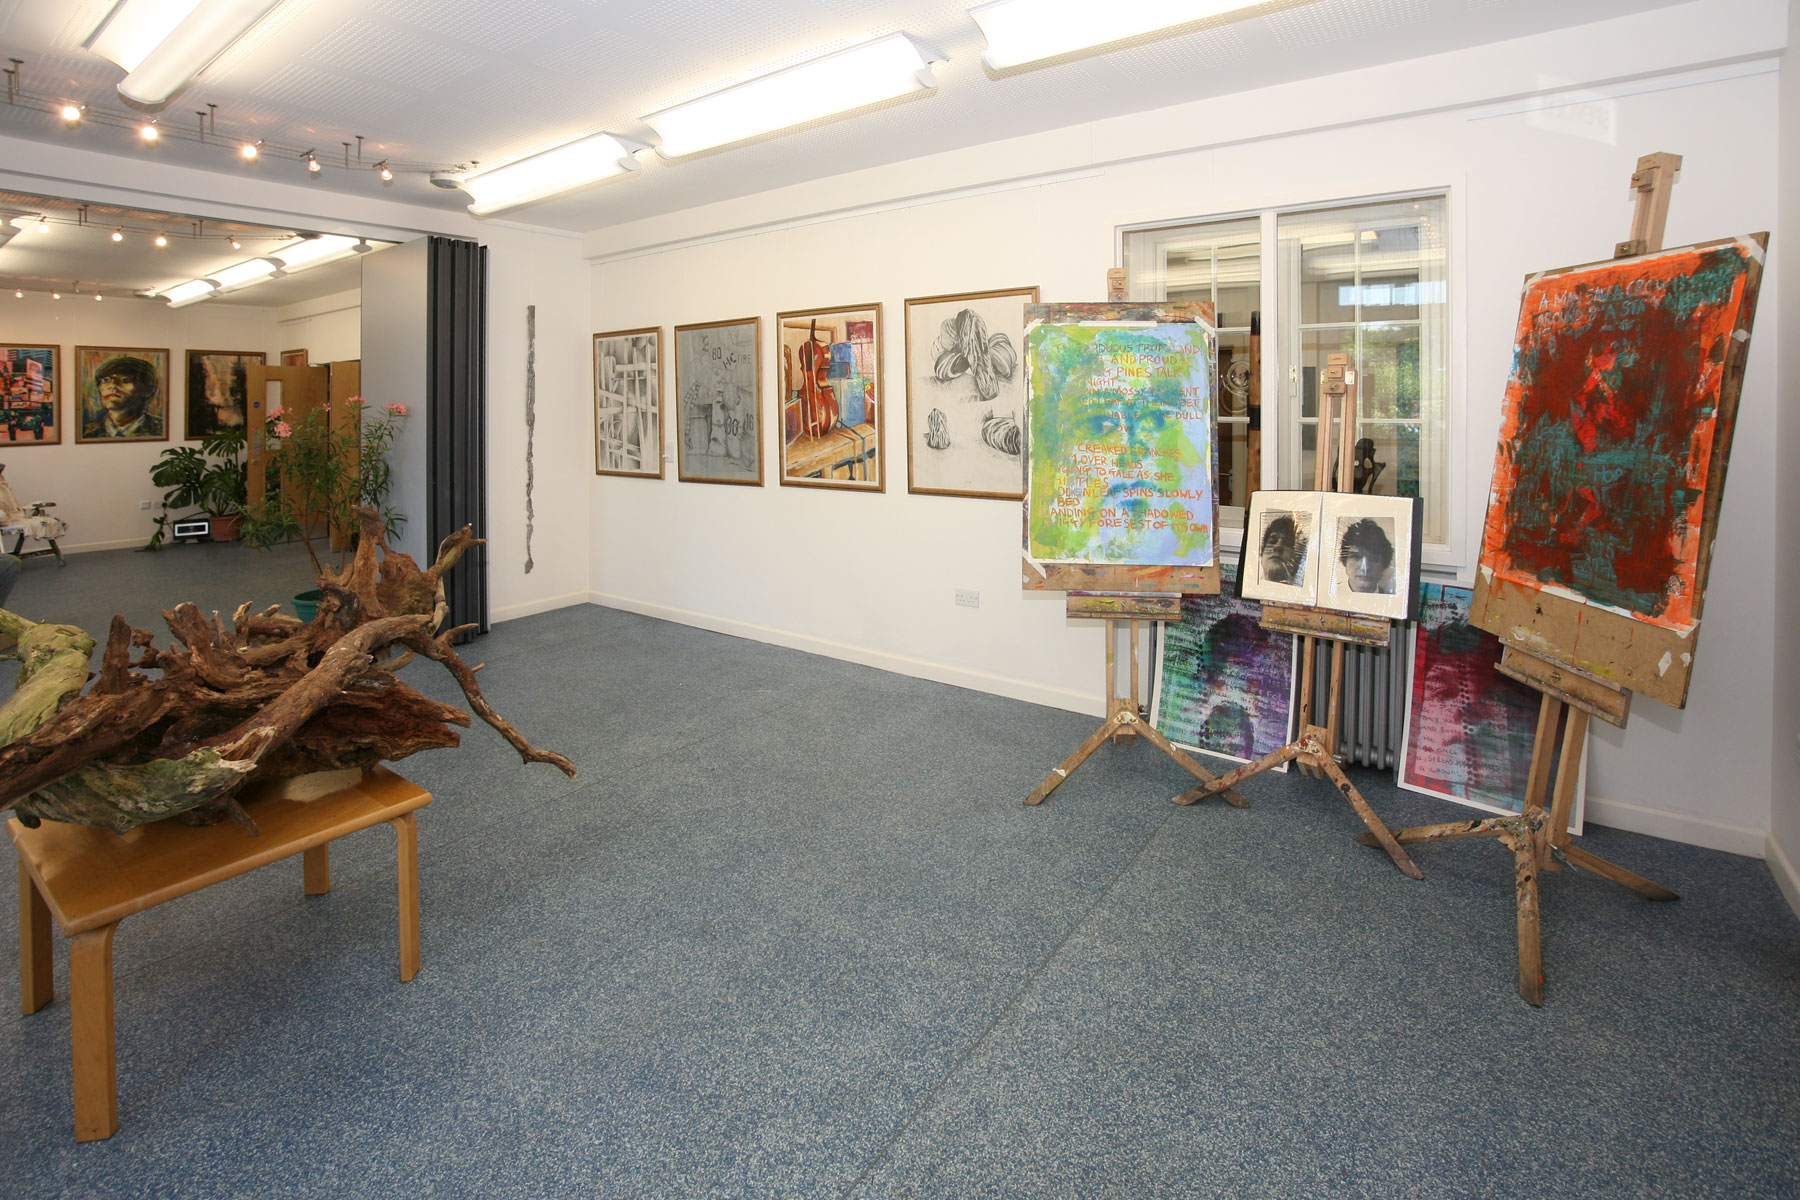 The Oratory School - Art Department and Pupil Art Gallery